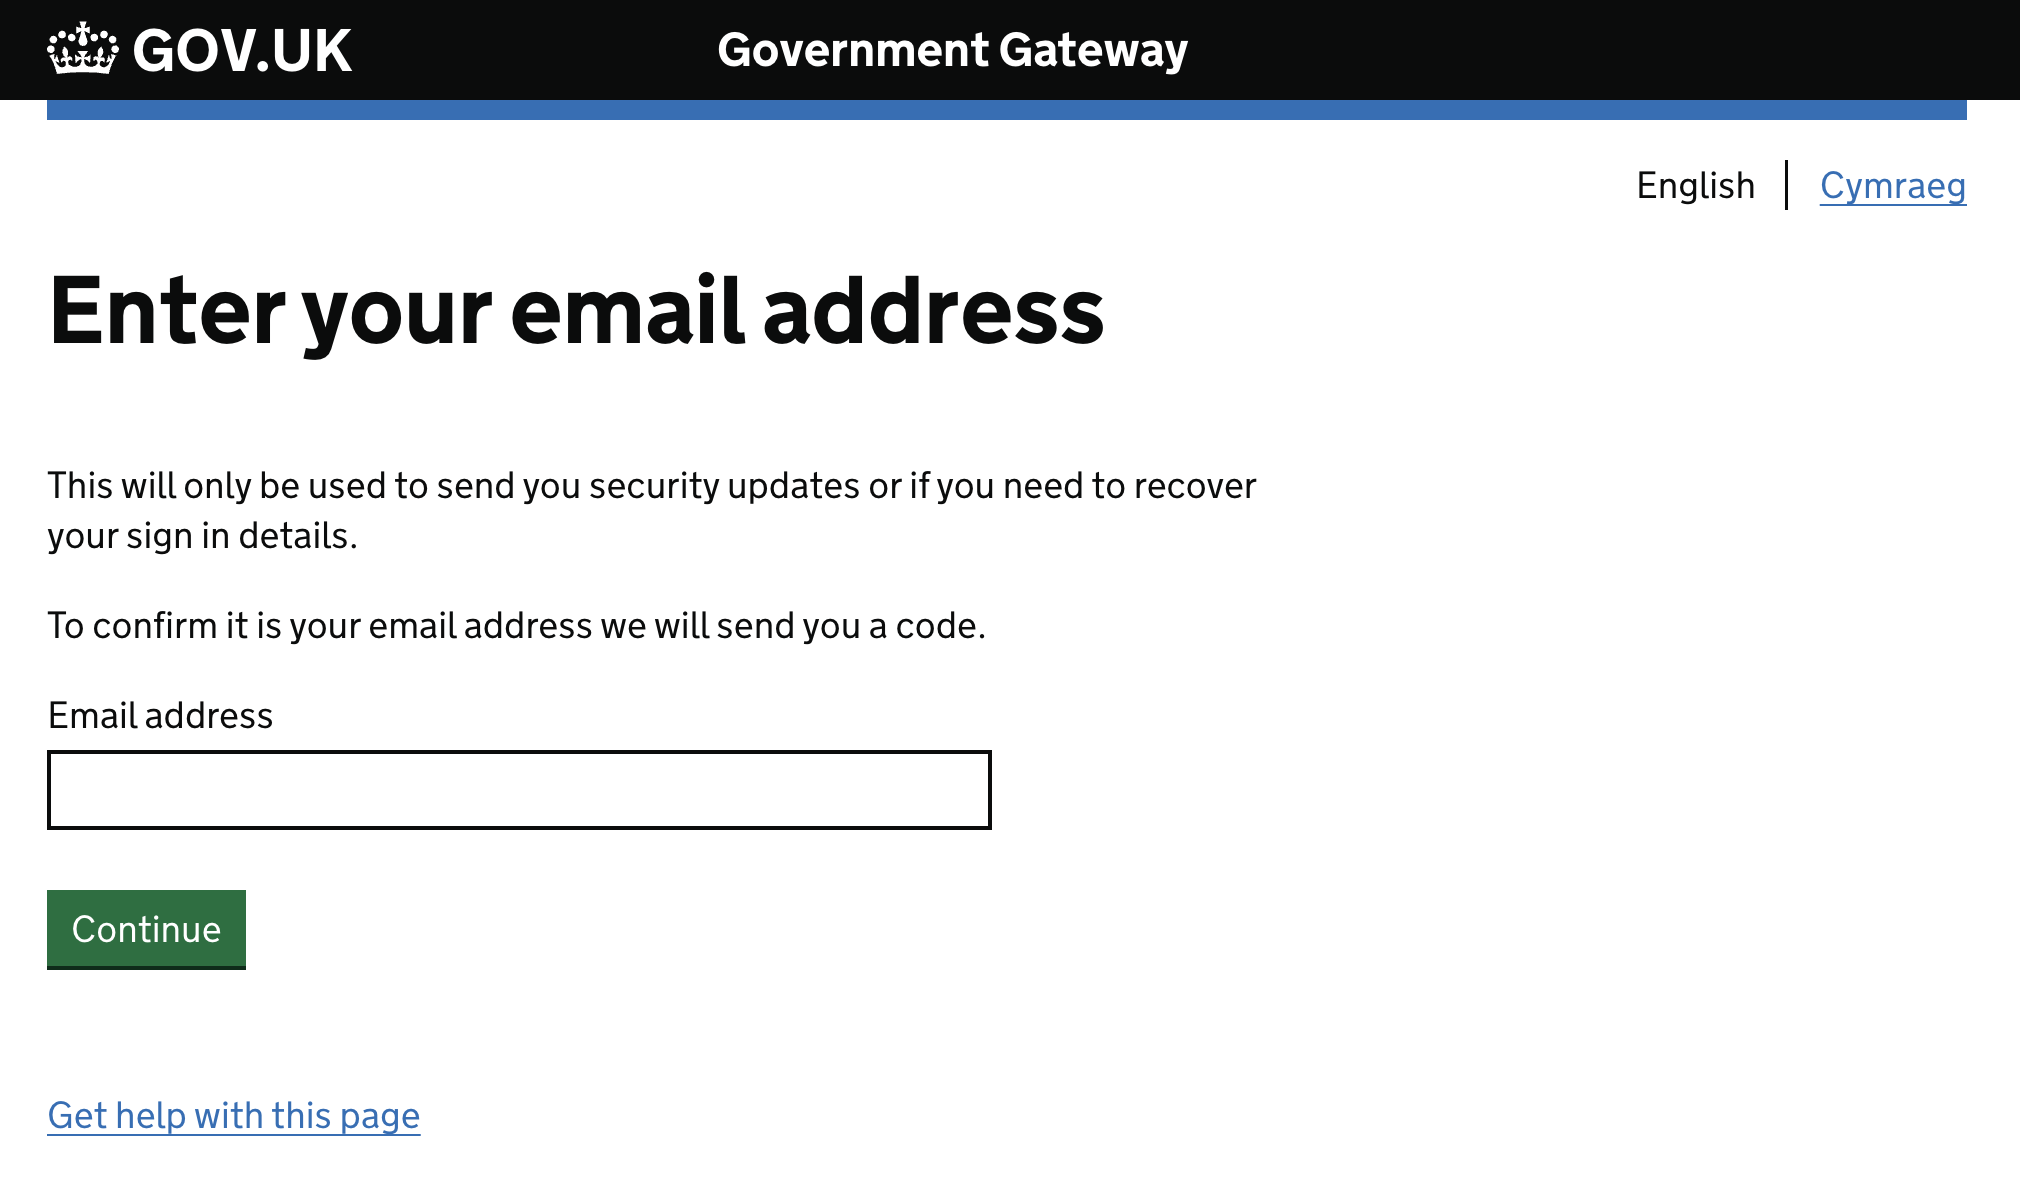 Gov.UK. Government gateway. Enter your email address. This will only be used to send you security updates or if you need to recover your sign in details. To confirm it is your email address we will send you a code.